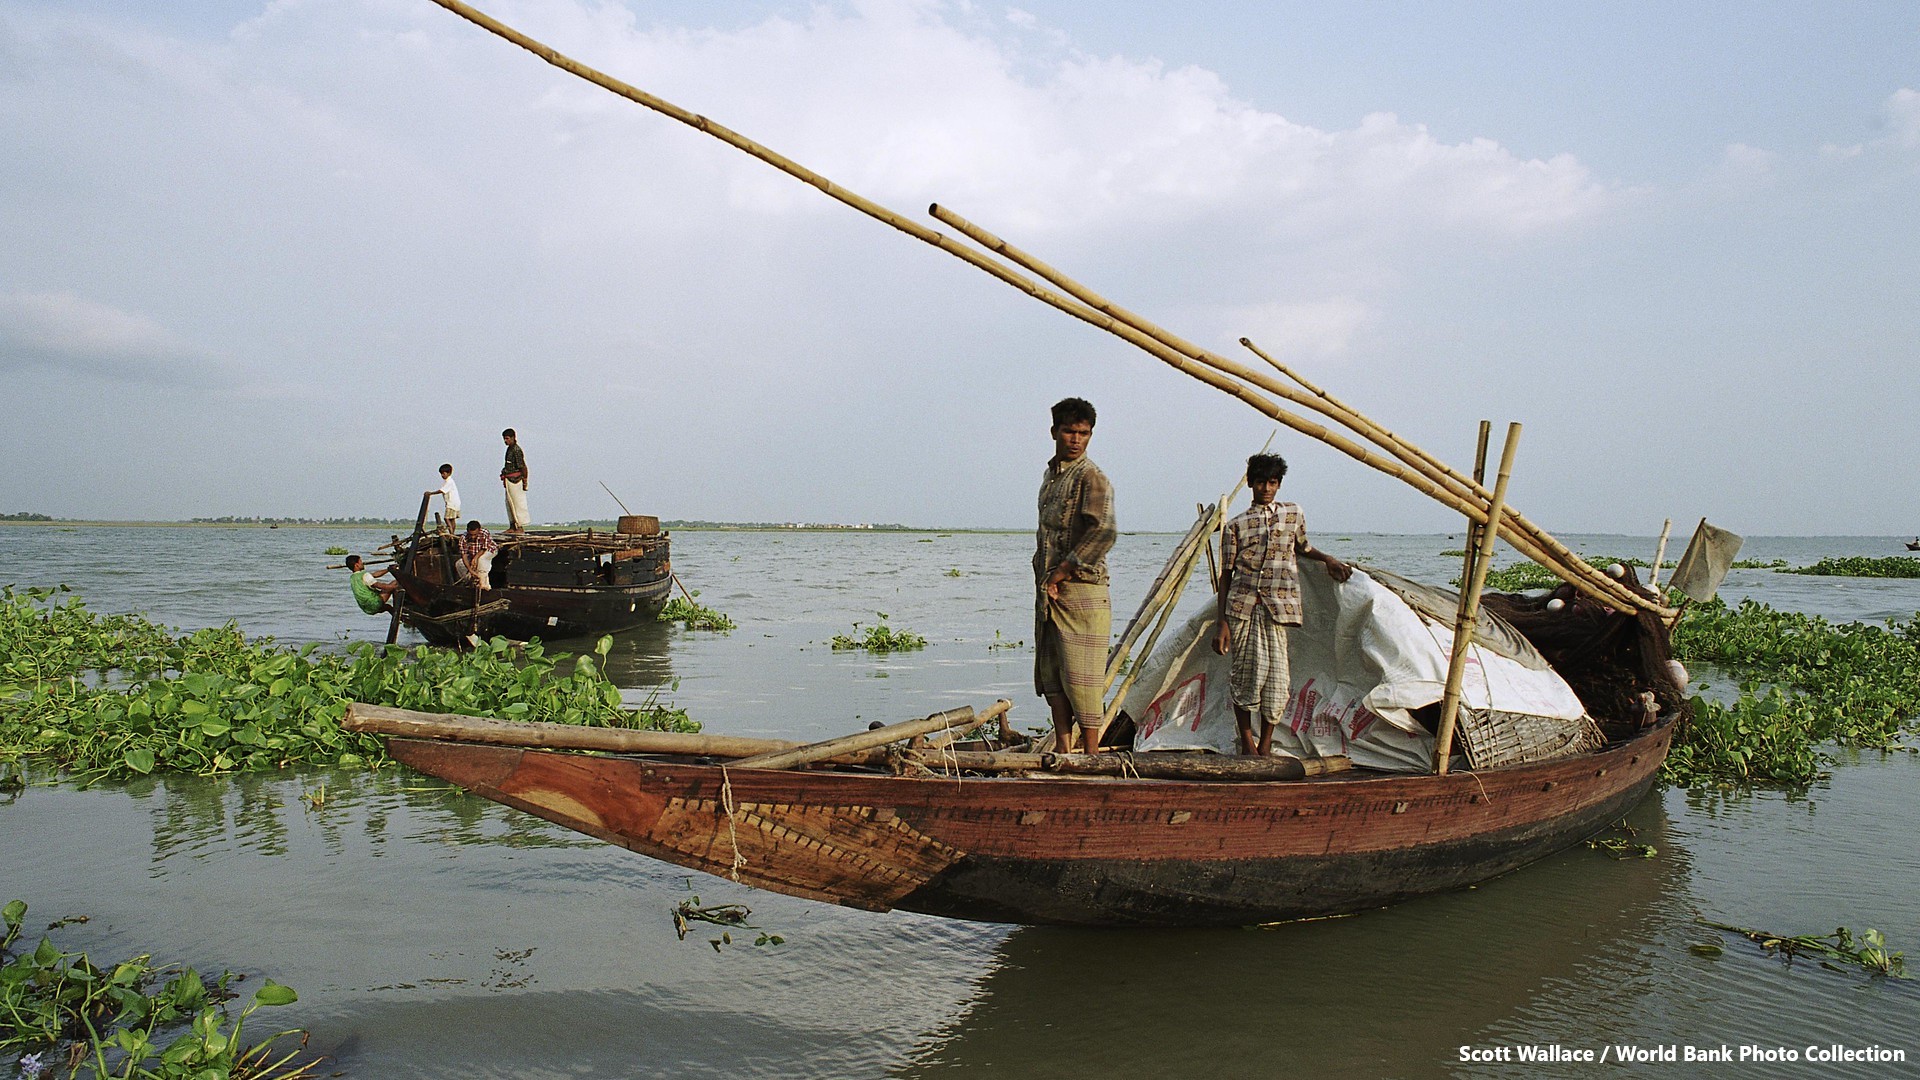 Local boats with cargoes used for transporting goods along rivers and waterways, men and boys punting the boats in shallow water.